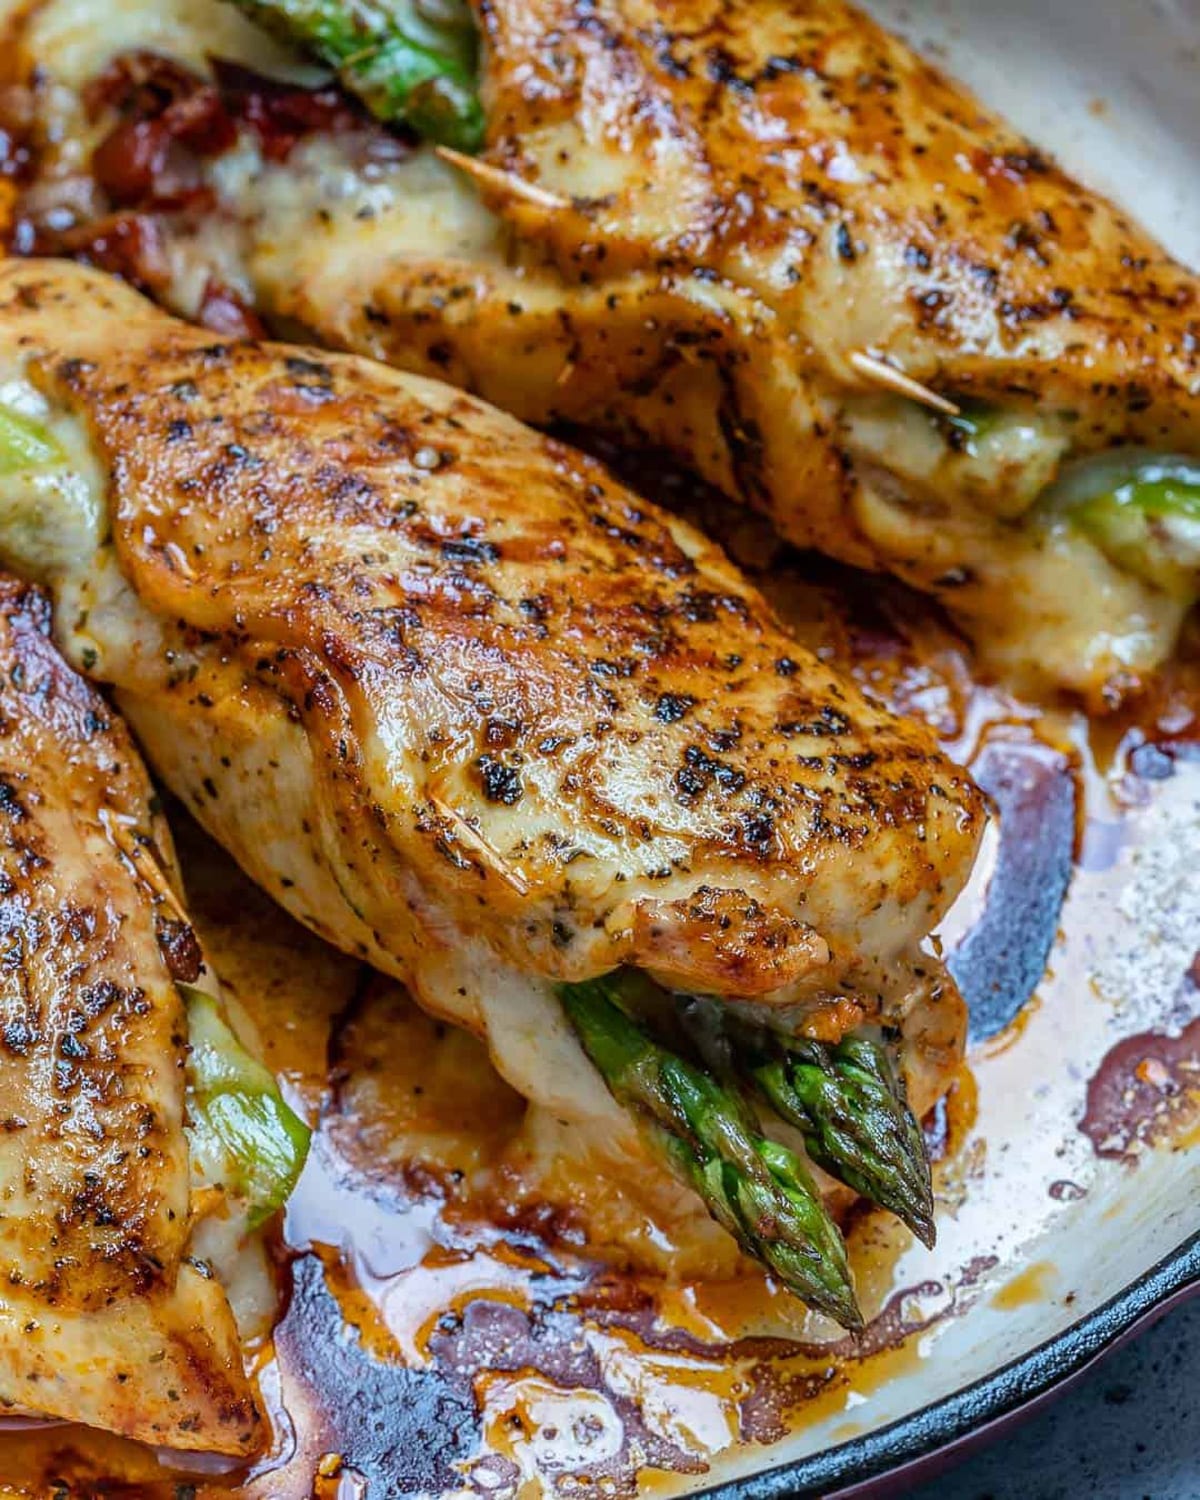 Asparagus stuffed chicken breasts